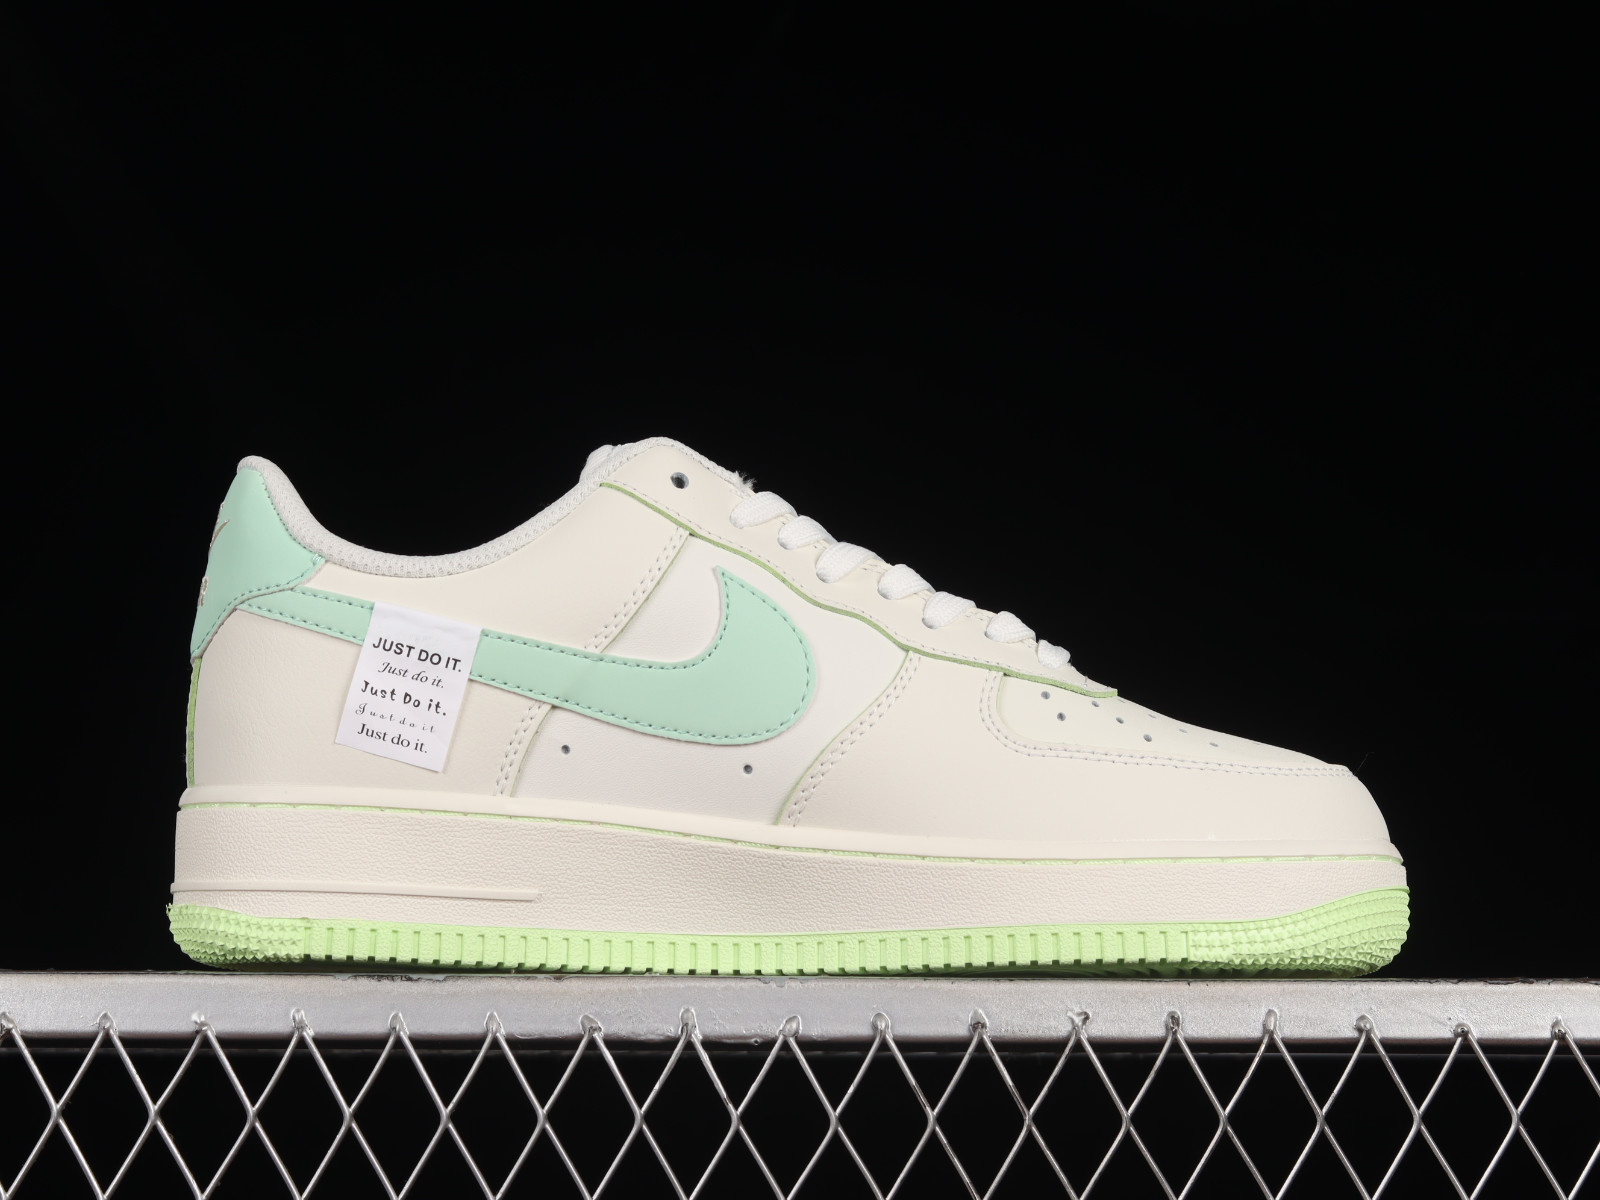 nike air vibenna green screen size chart in inches - 555 - MultiscaleconsultingShops - Nike Air Force 1 07 Low White Light Green Metallic Gold FB1839